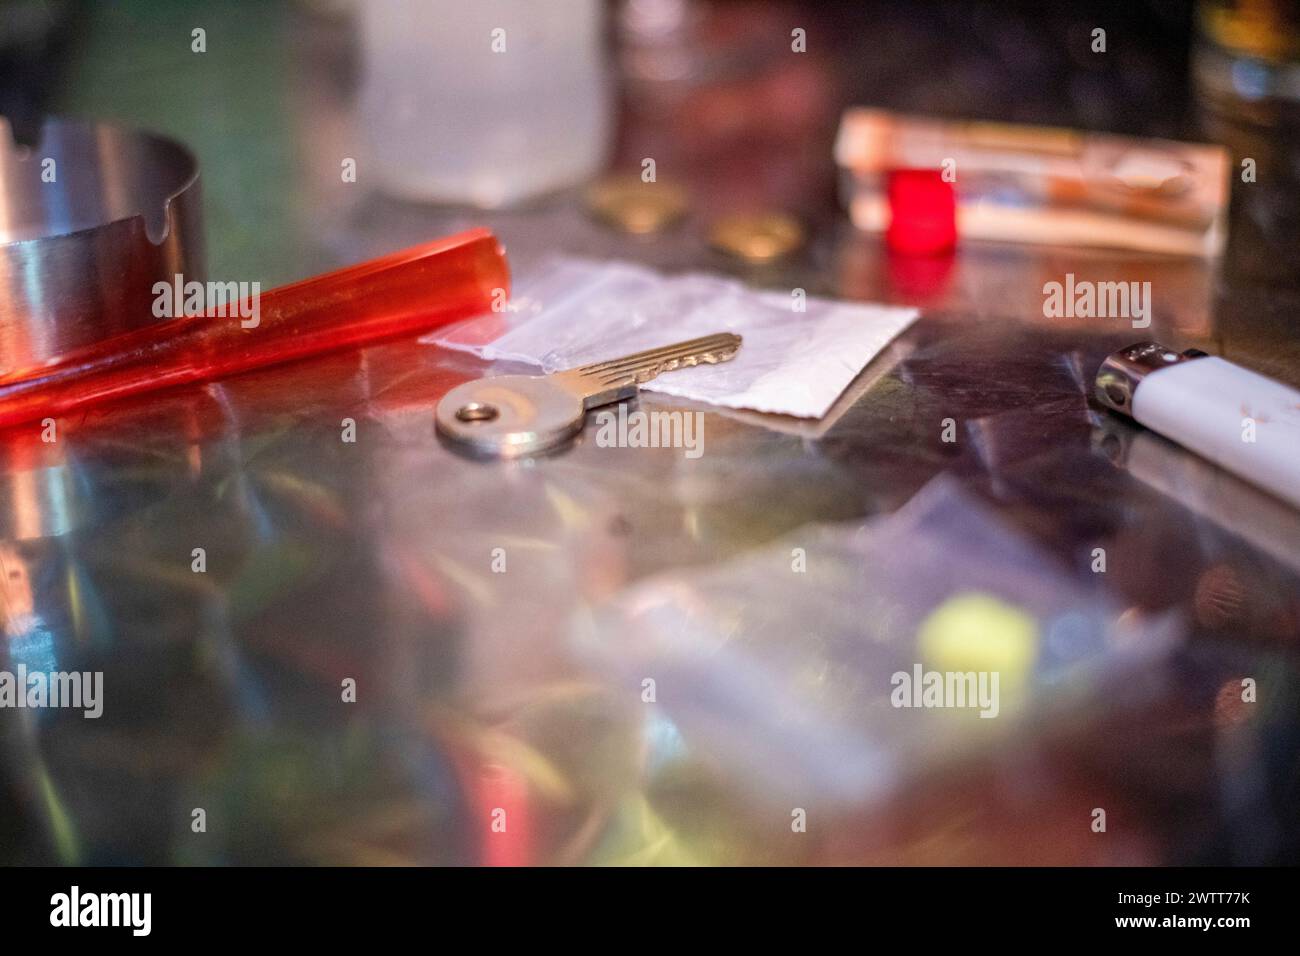 An assortment of personal items scattered on a table. Stock Photo